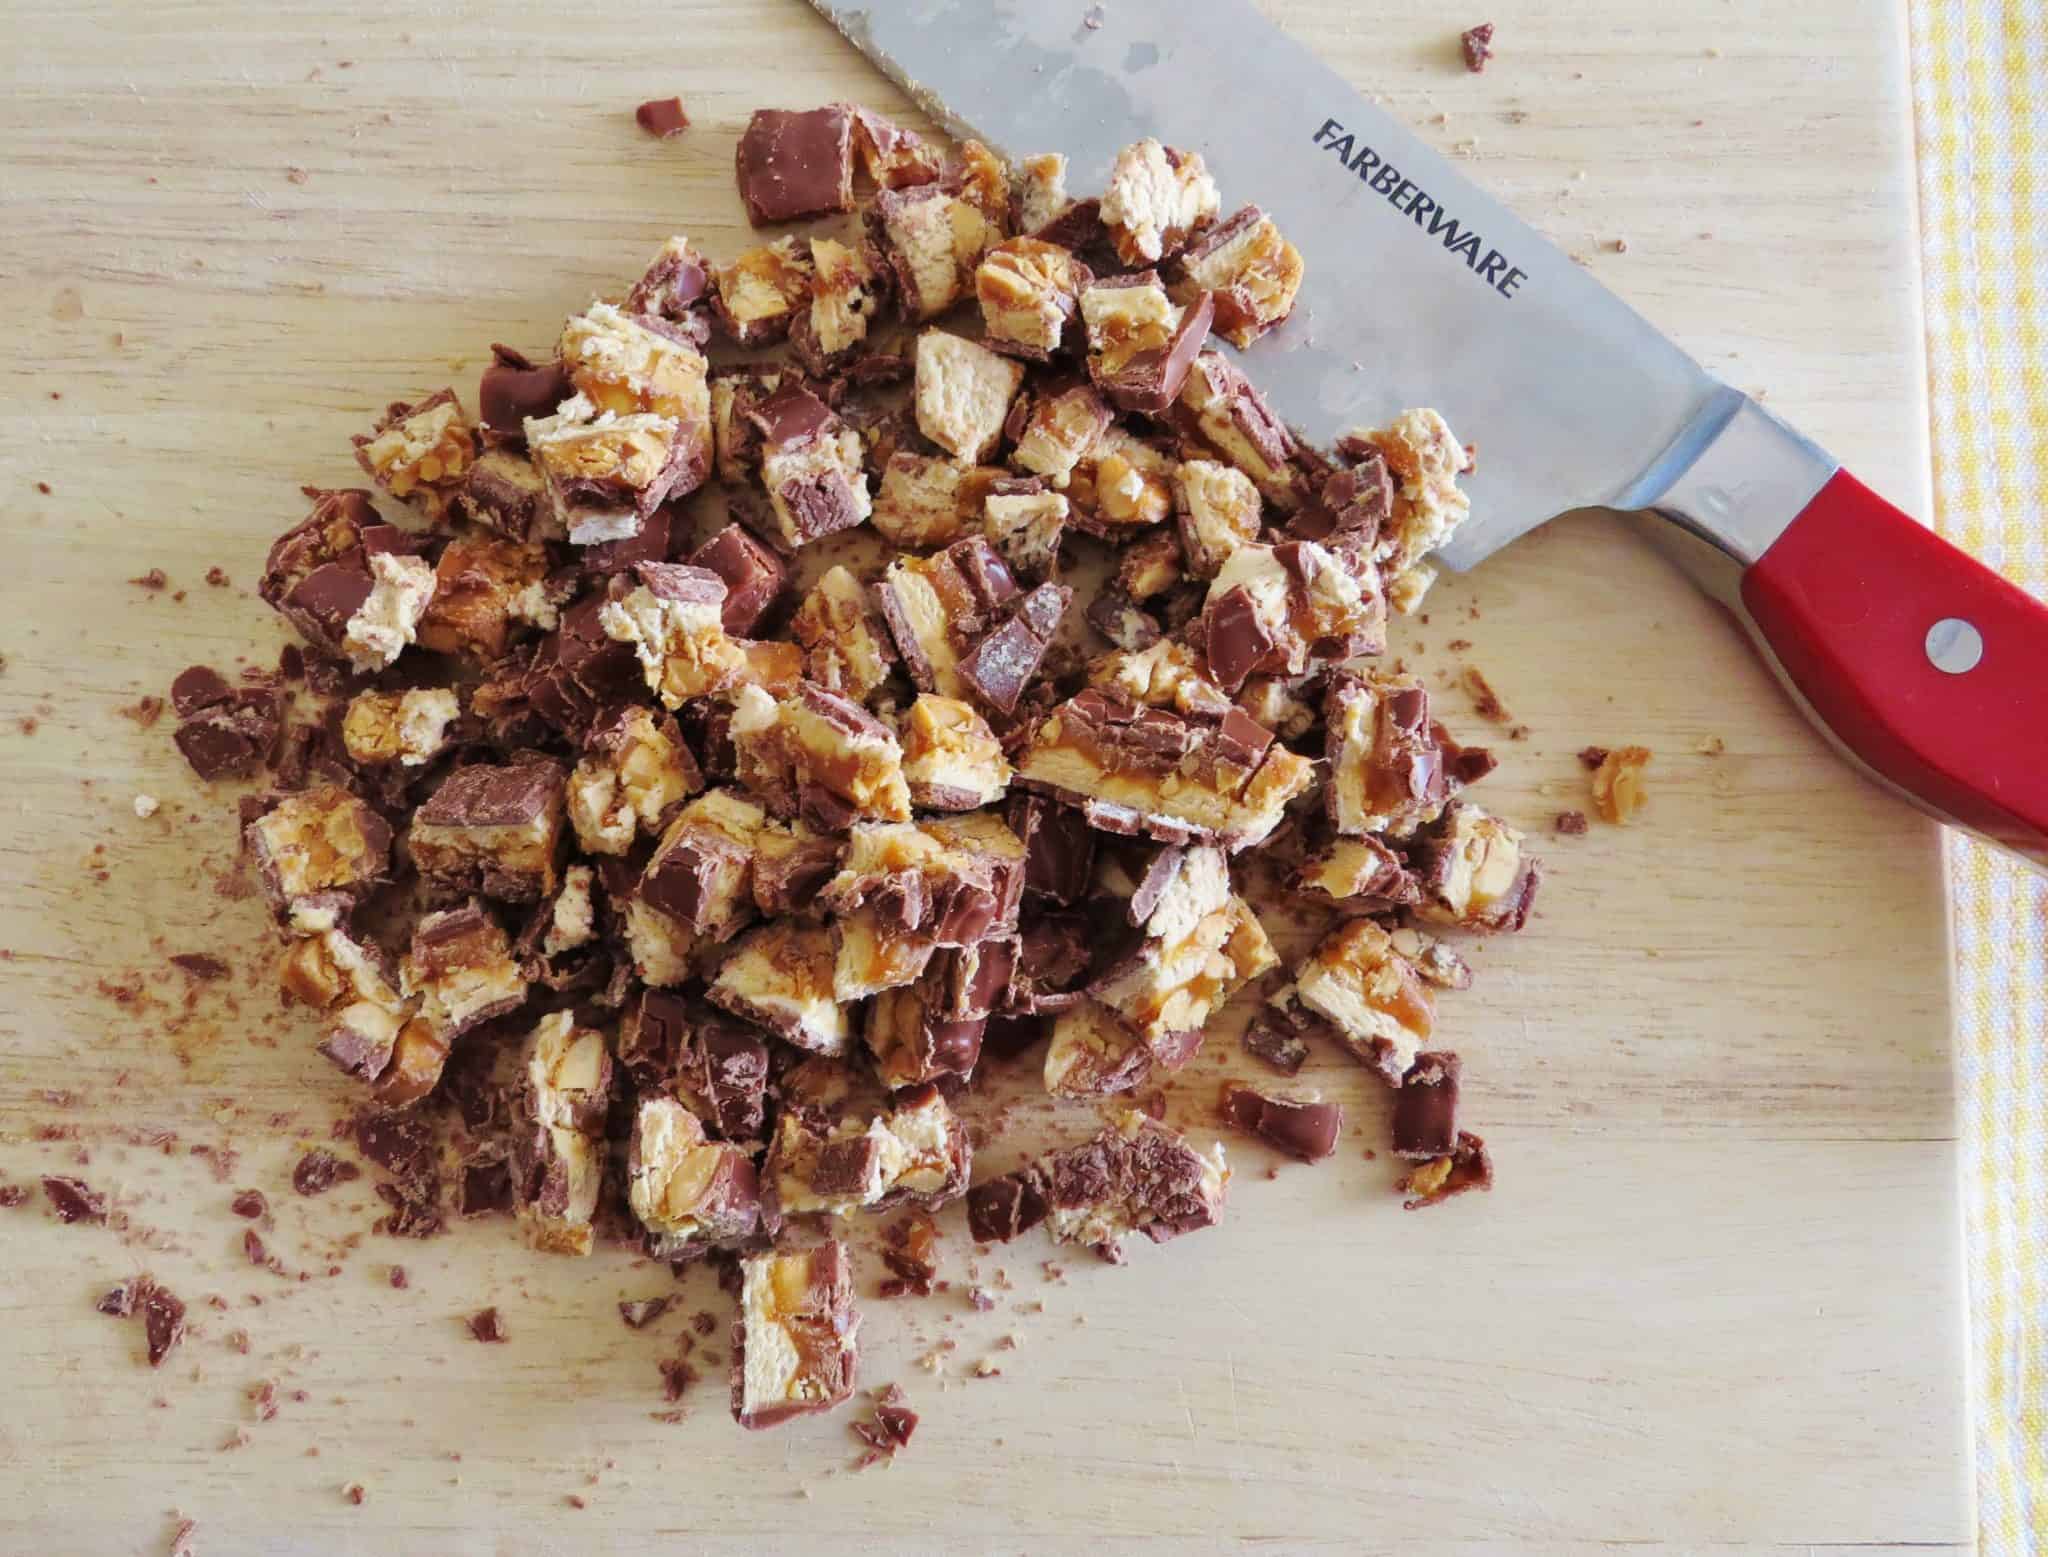 chopped Snickers candy bars on a wooden cutting board with a knife set to the side.